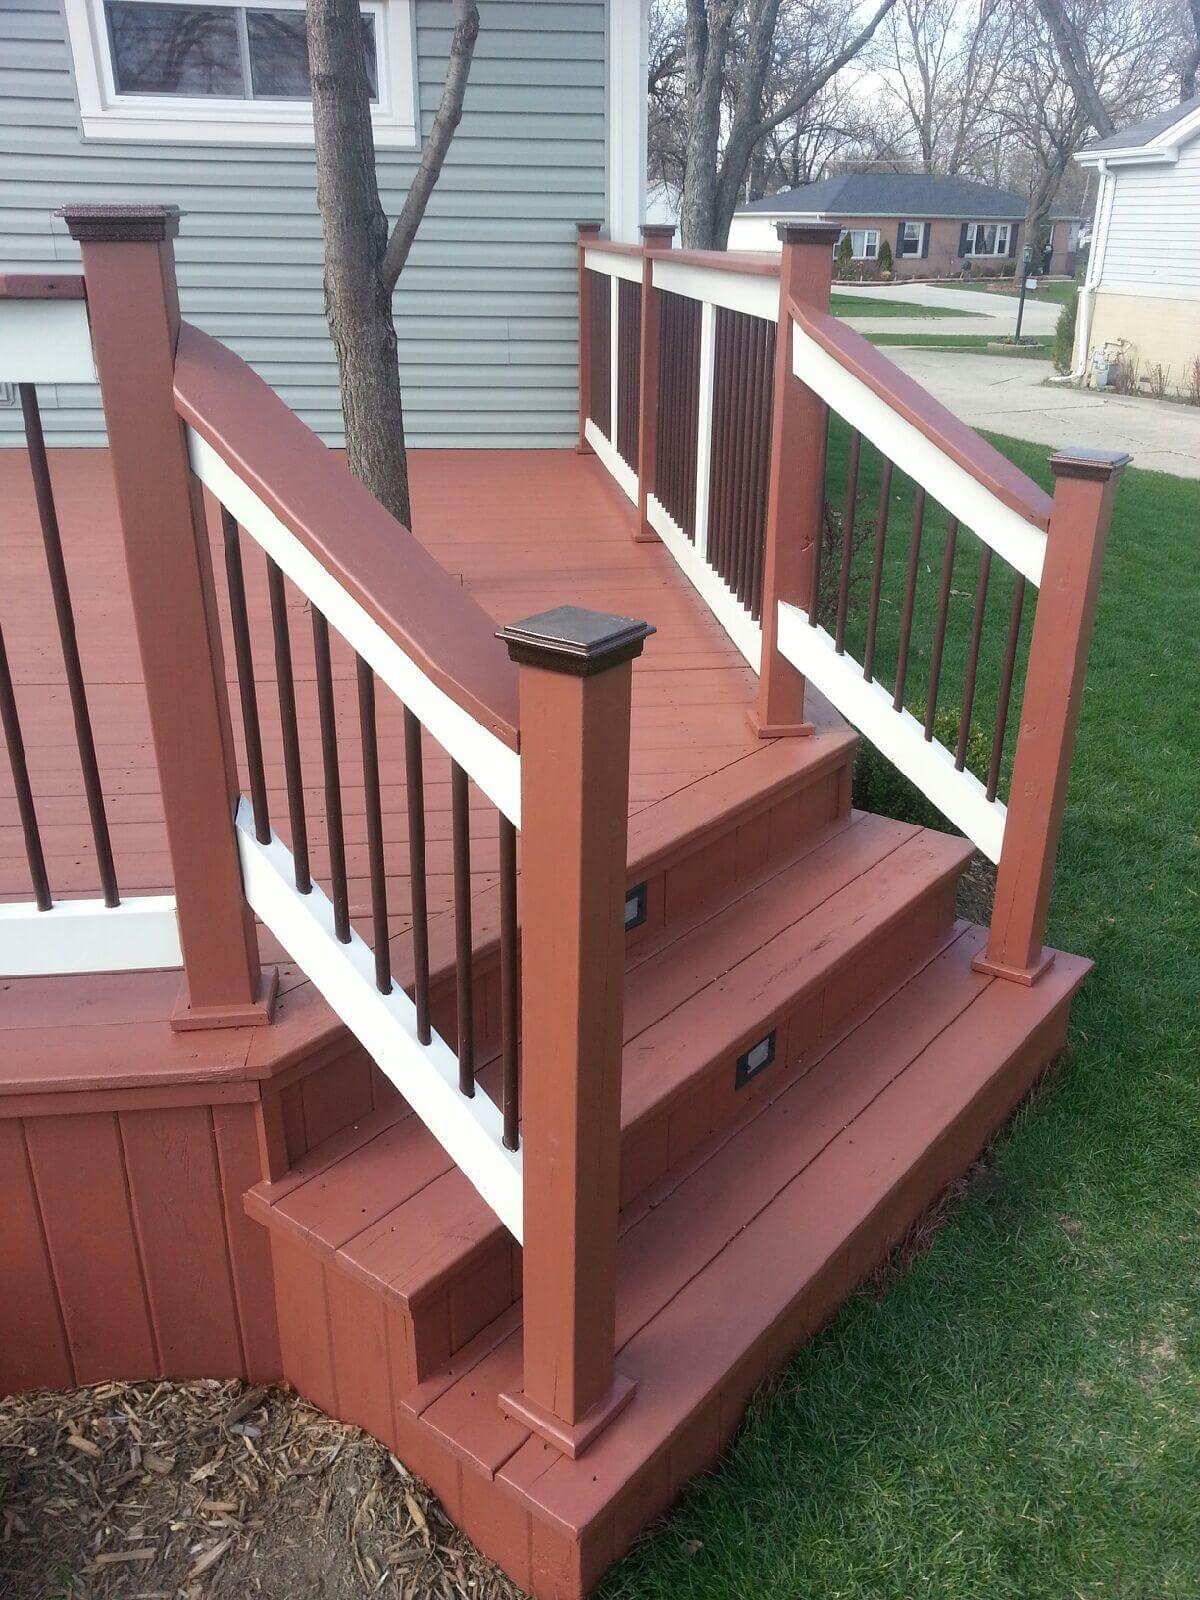 Repairs and maintenance for your deck, fence, and exterior wood staining. - Deck Staining Elk Grove - Deck Cleaning Services